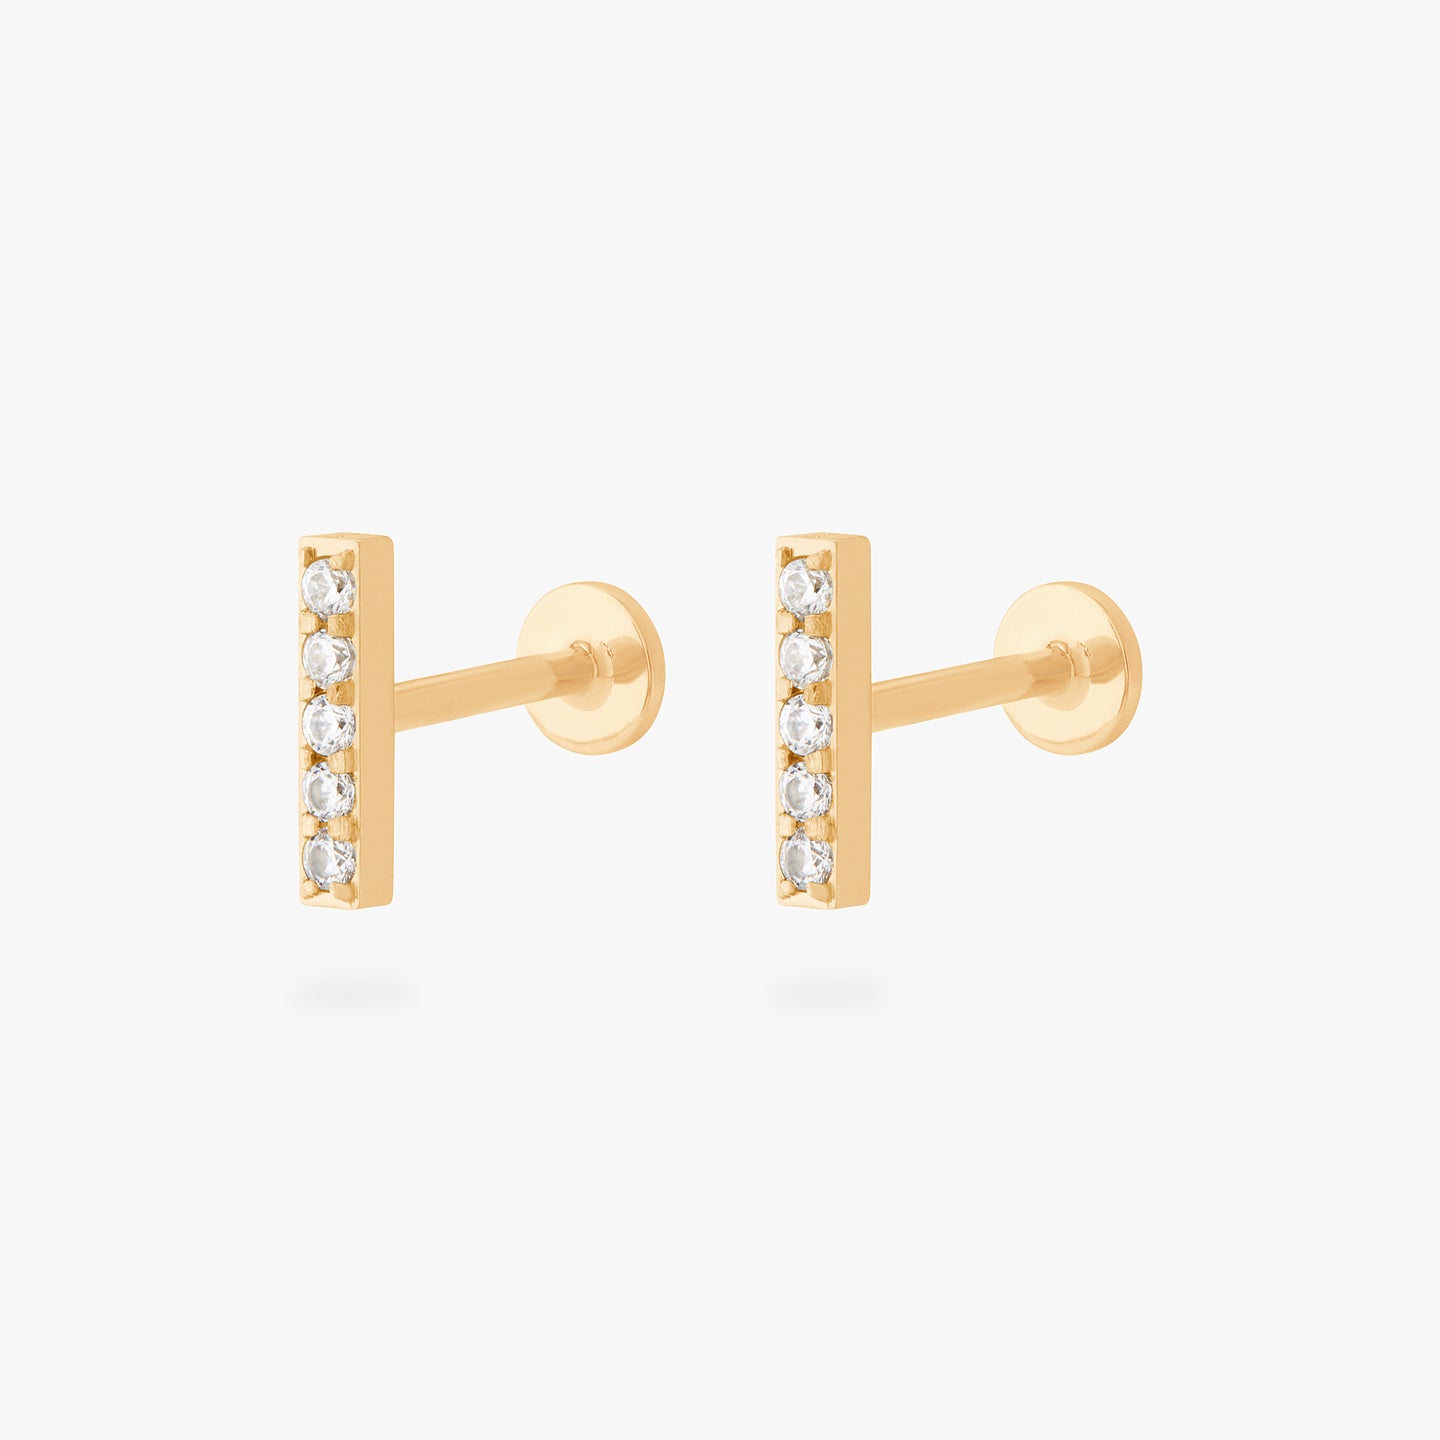 This is an image of a pair of gold/clear bars that have 5 mini CZs in a line formation with gold labrets with circle discs and the 